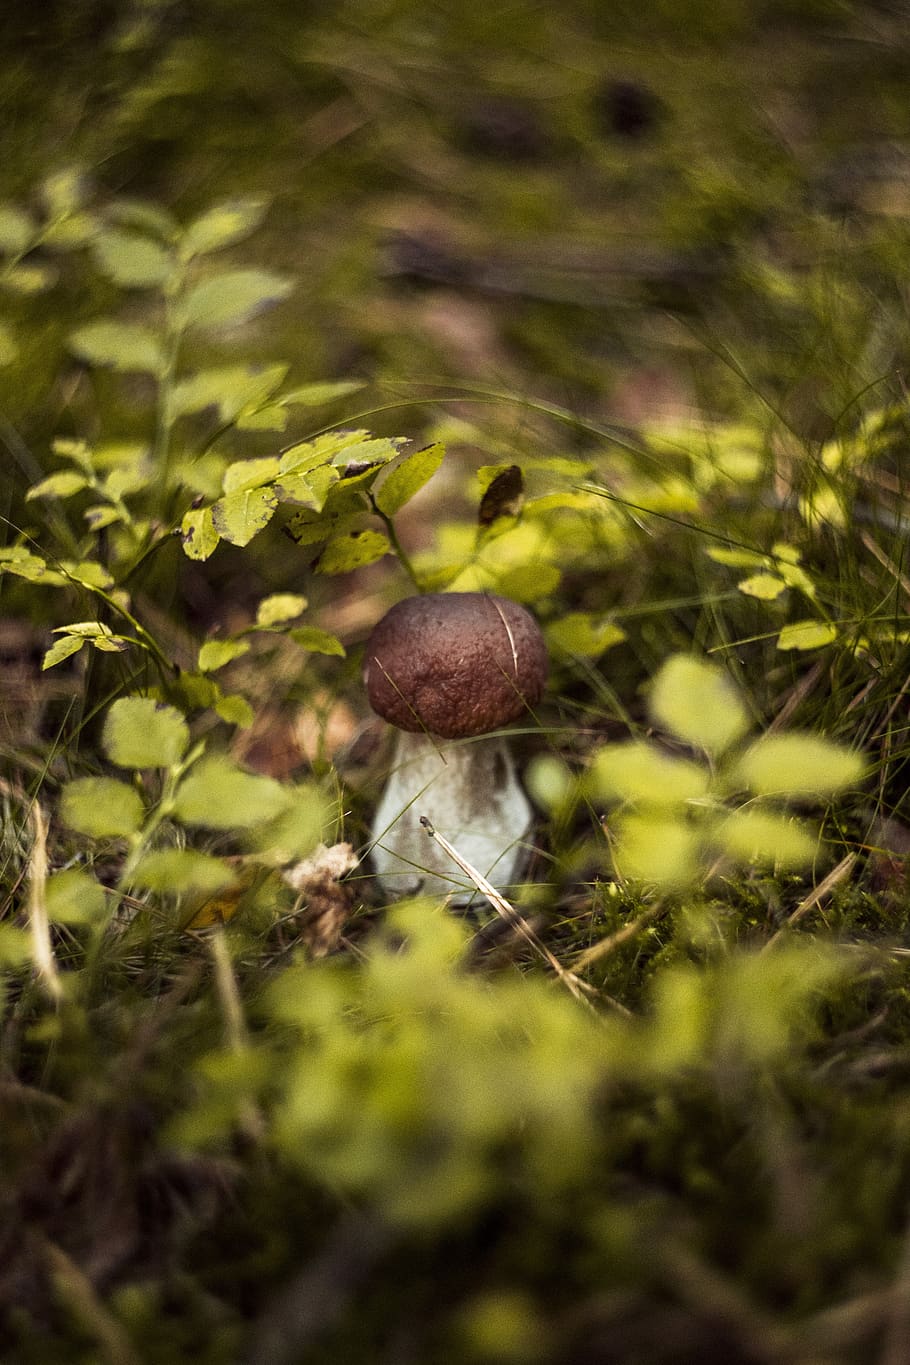 fungus, forest, day, autumn, mushrooms, red, toxic, hat, toadstool, edible